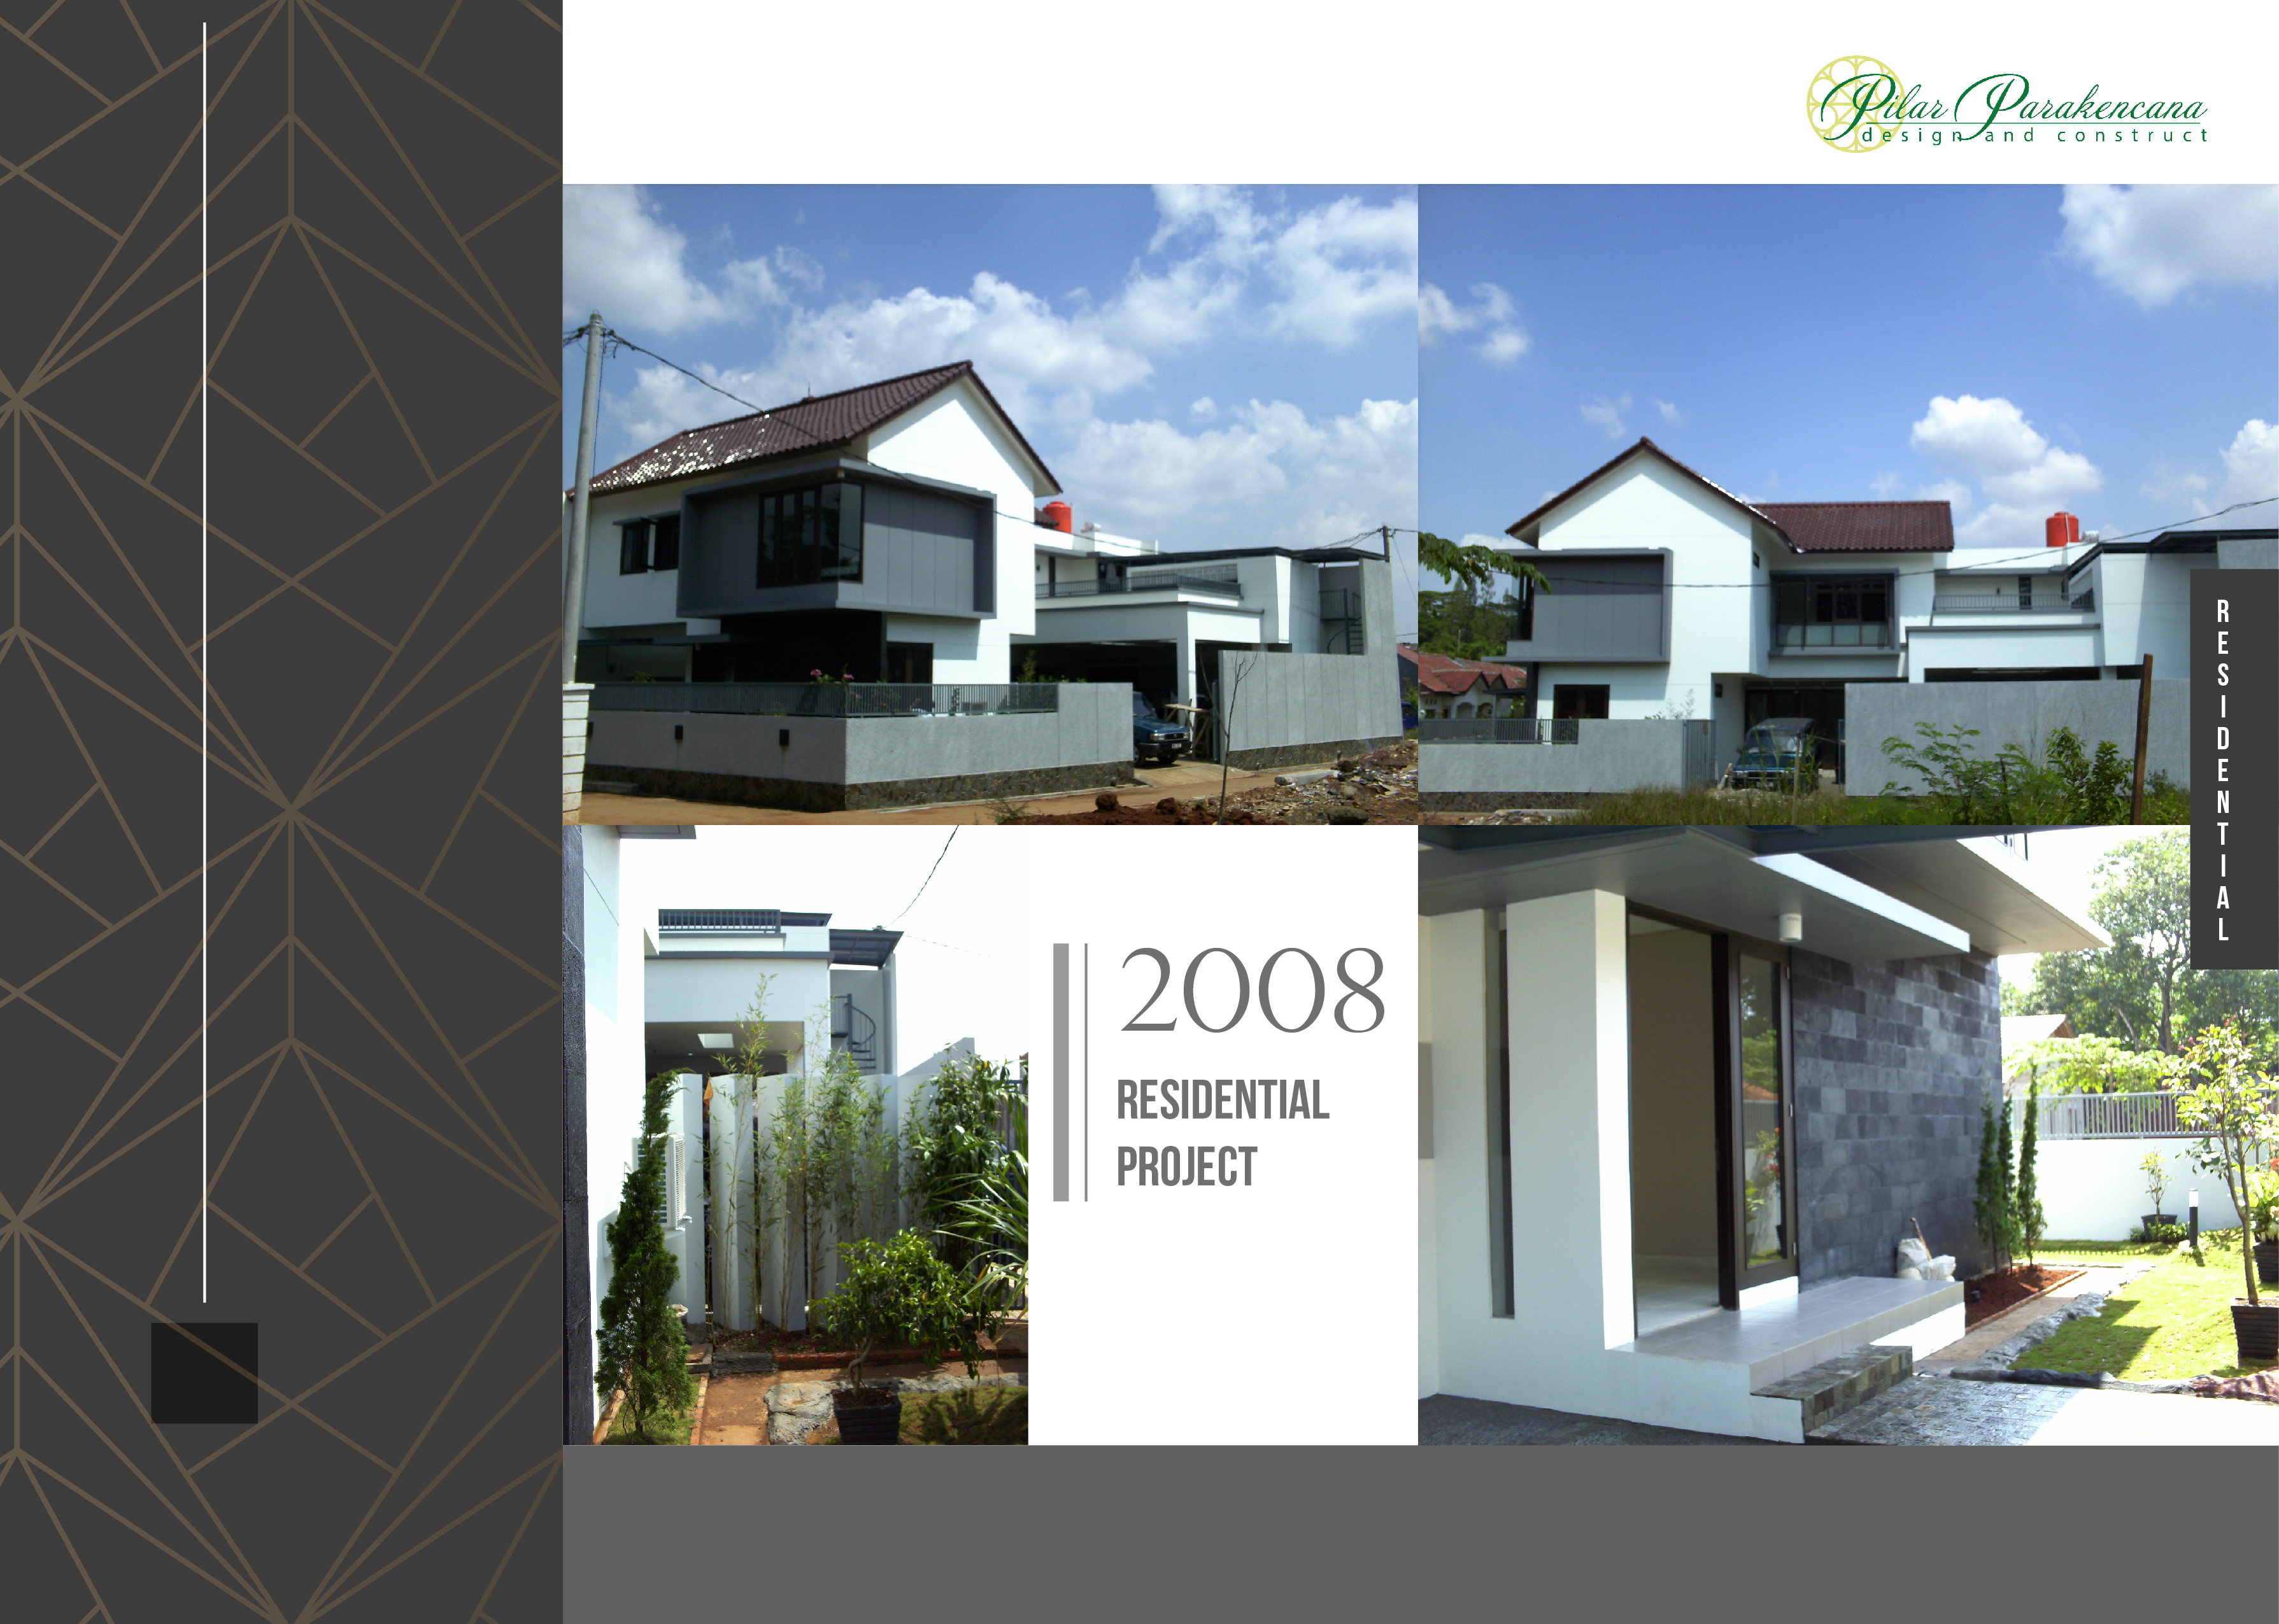 Residential Project - 2008